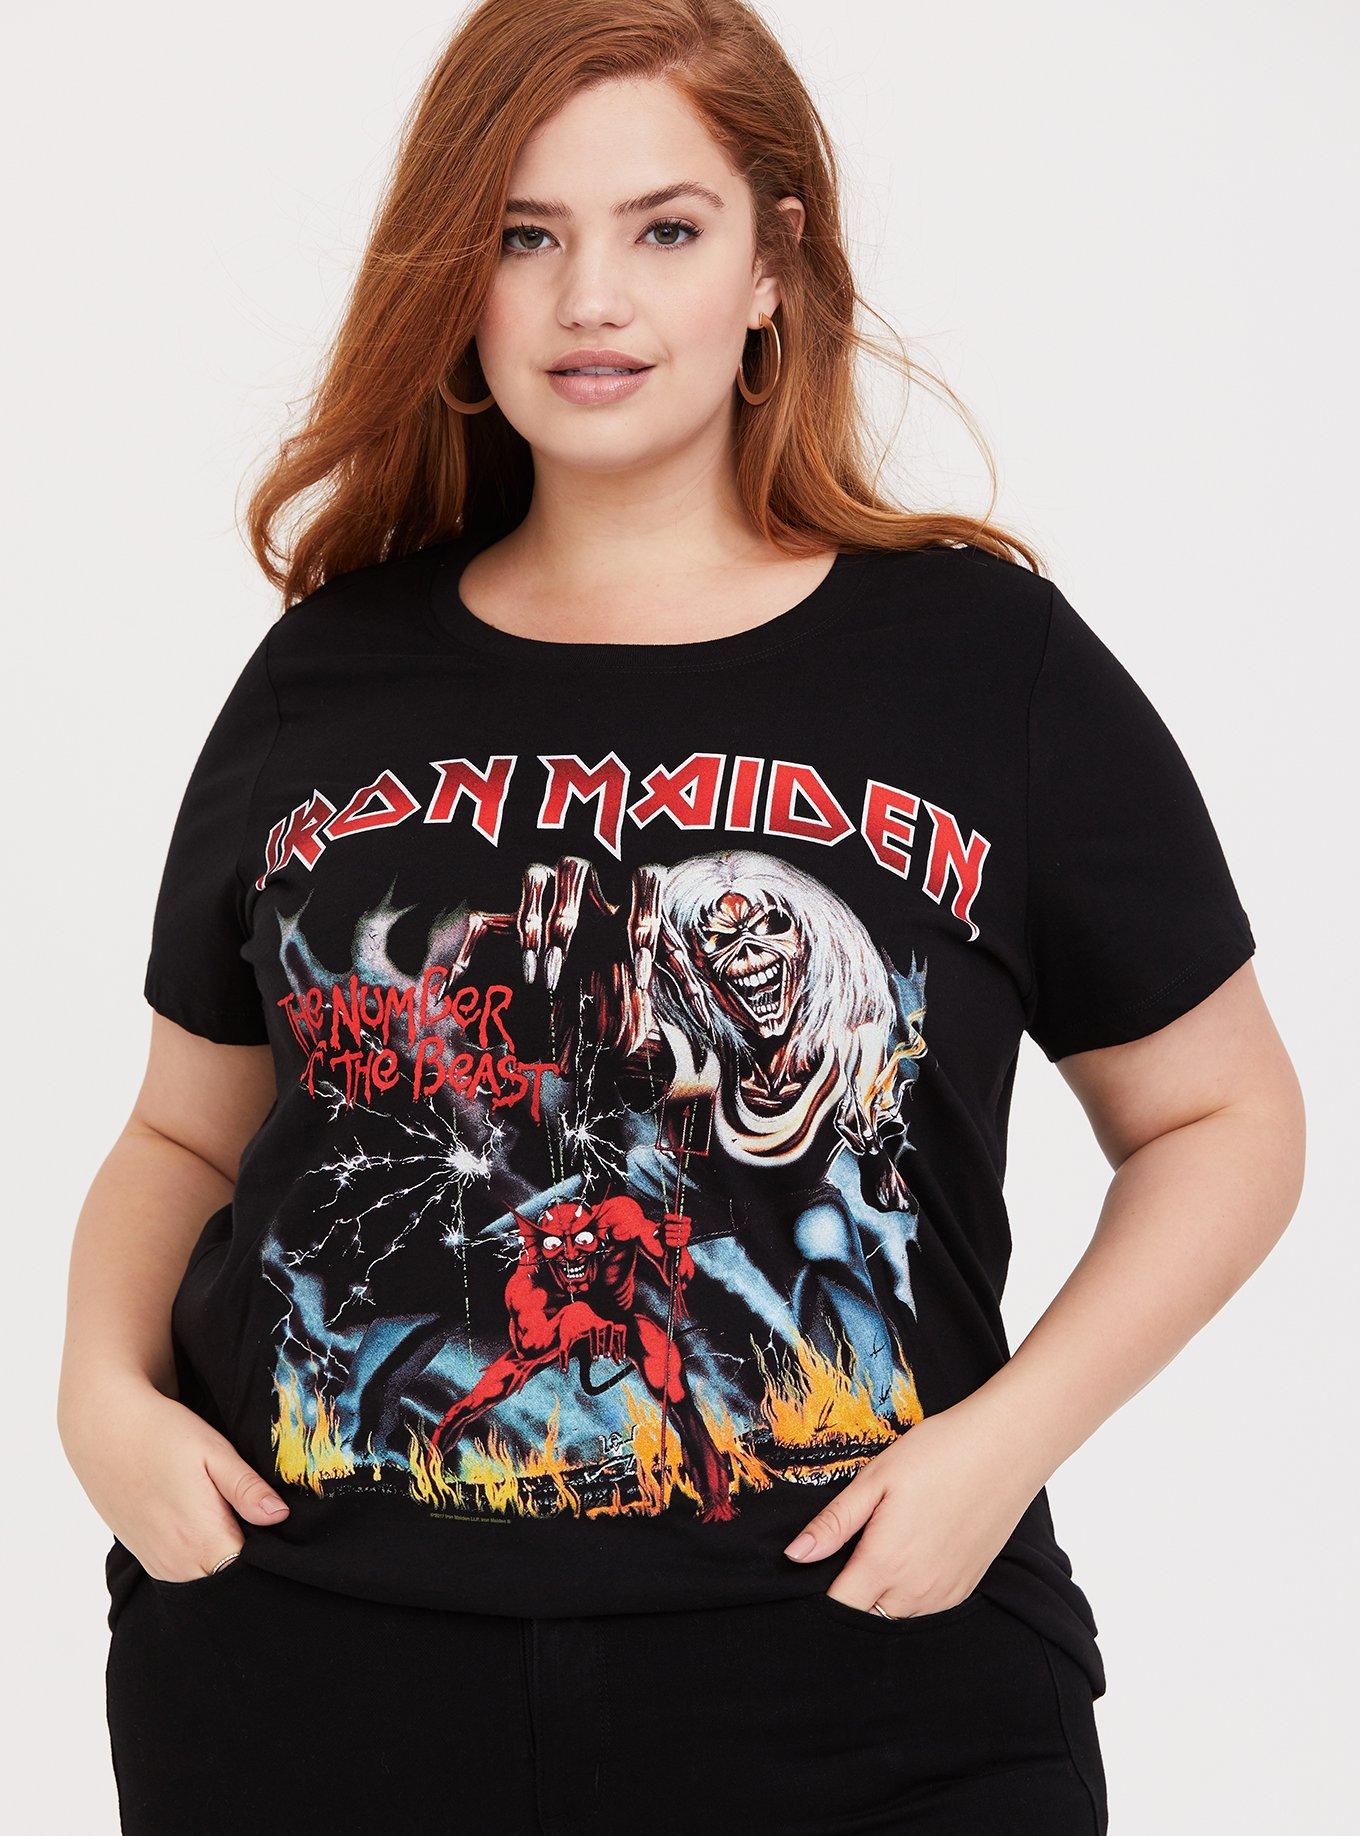  Global Iron Maiden Terminate Mens Short Sleeve T-Shirt-Black-Small  : Clothing, Shoes & Jewelry